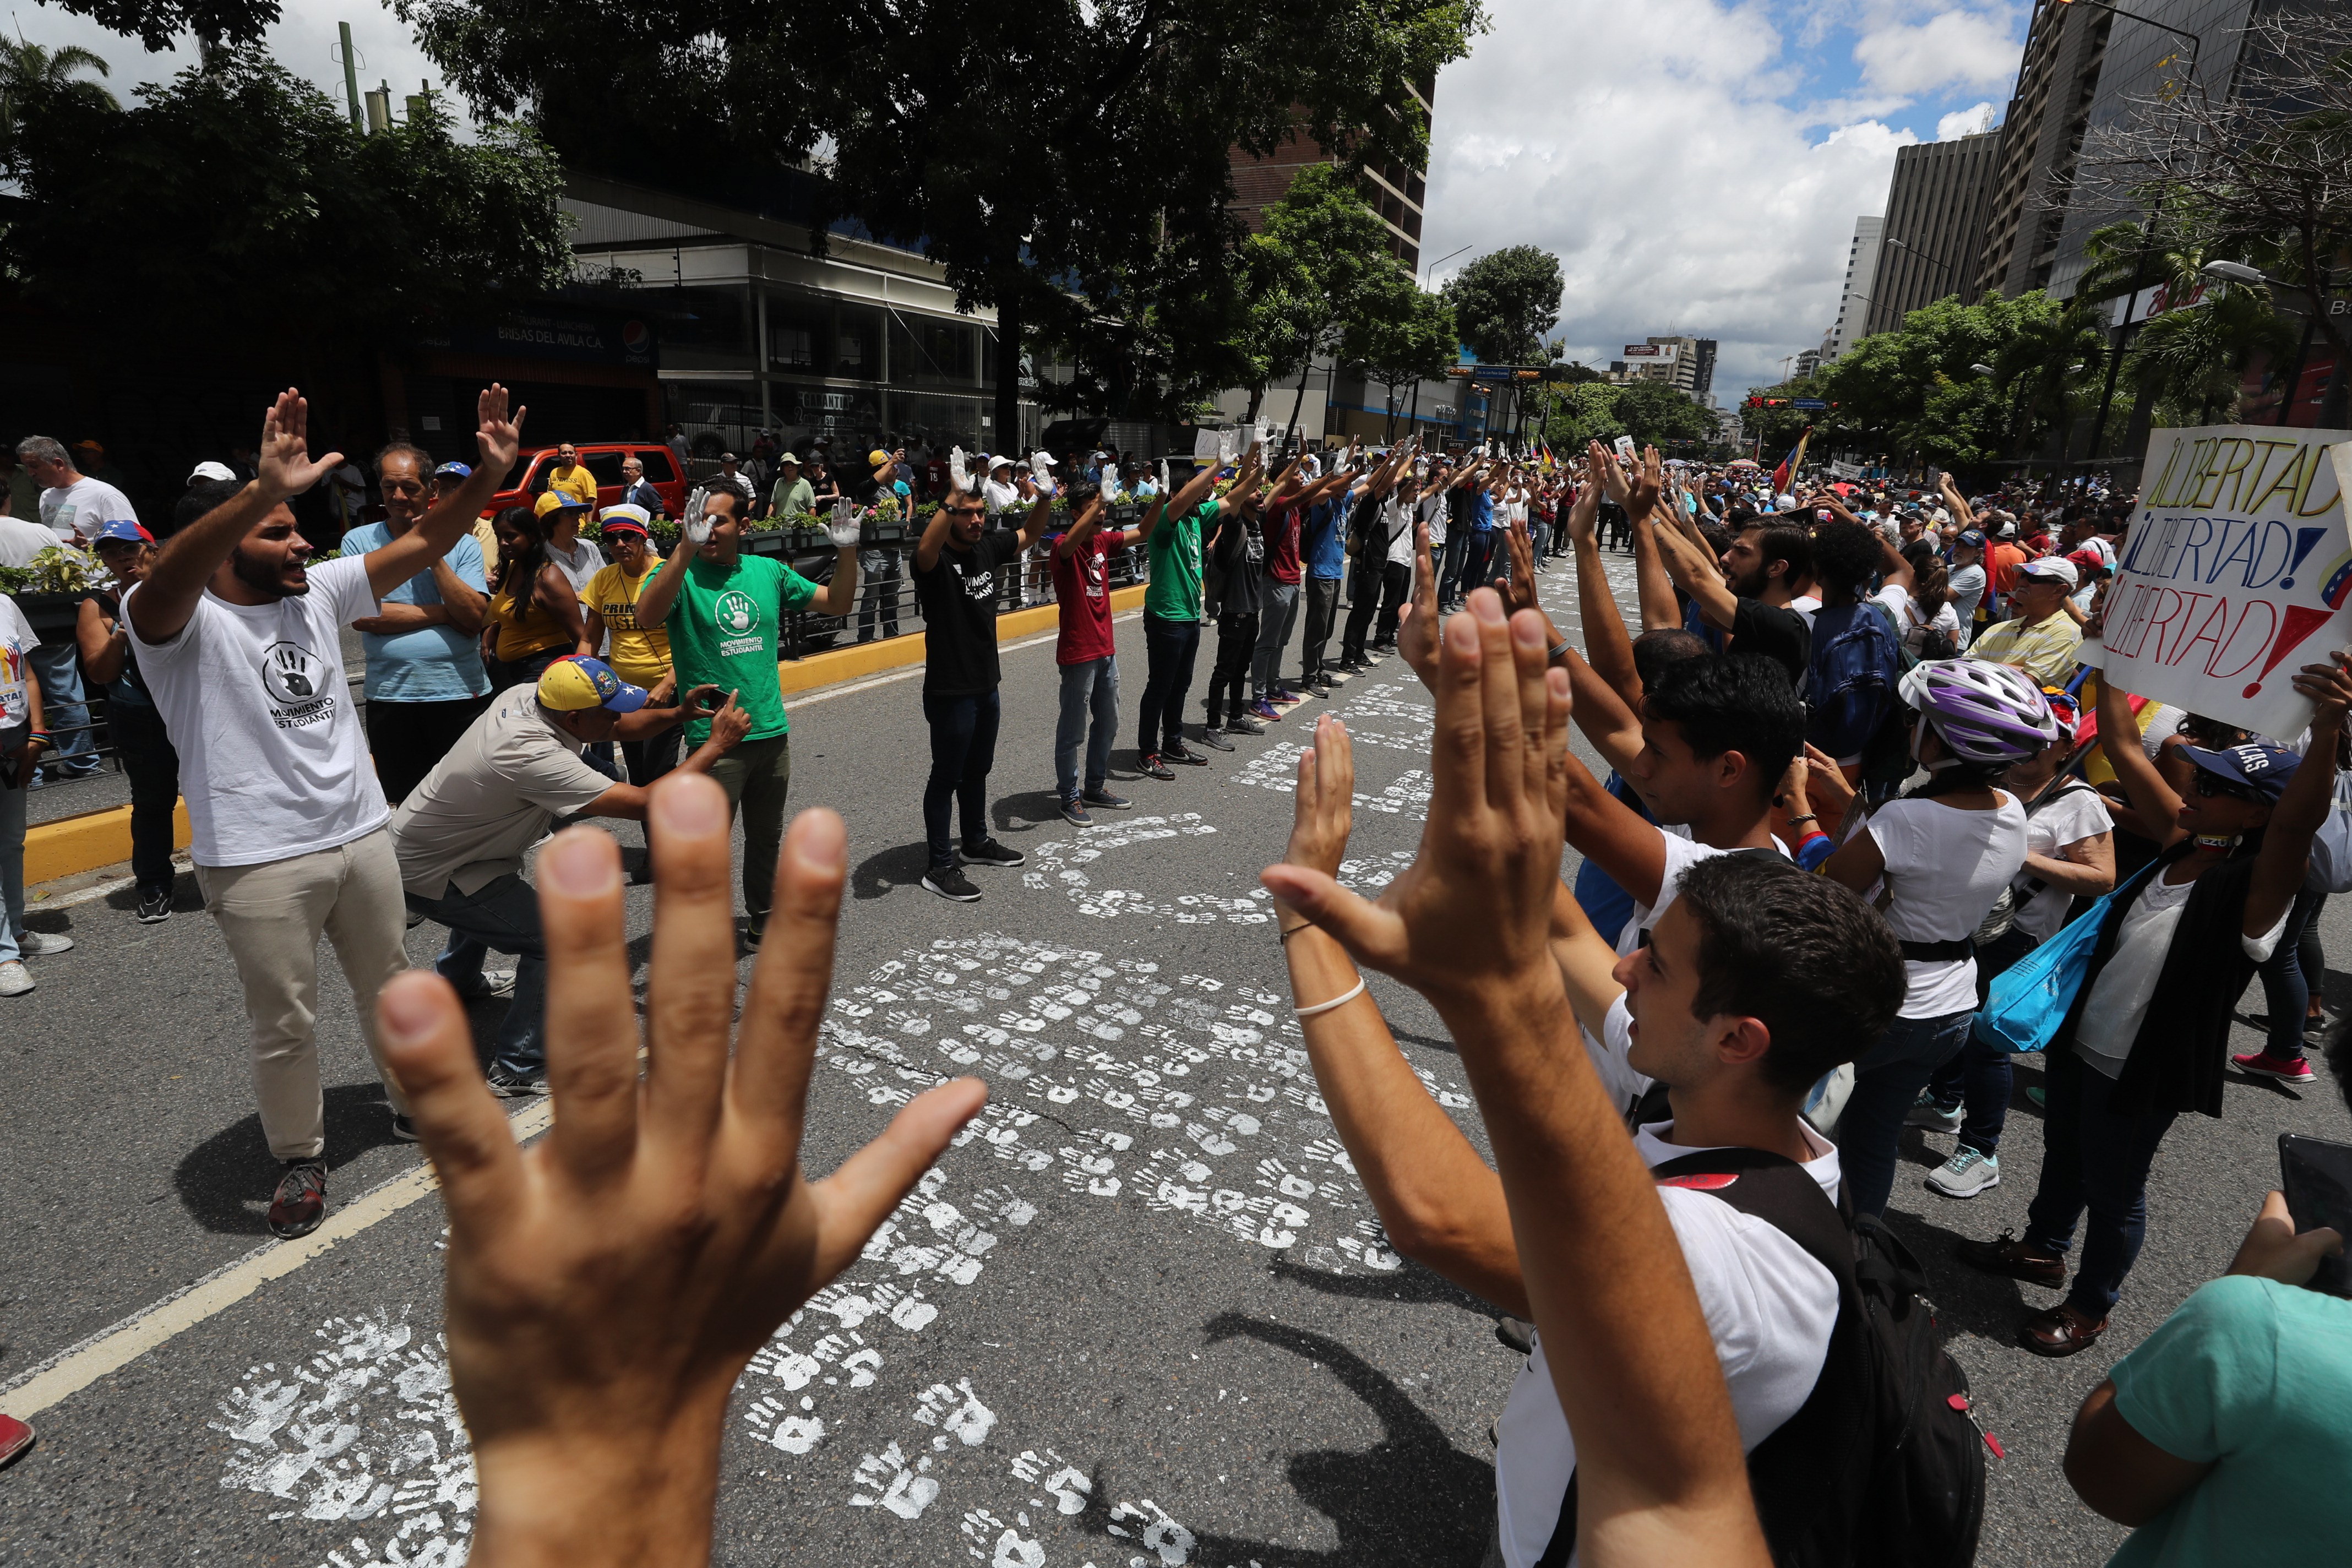 epa07697735 Opposition sympathizers participate in a protest called by Venezuelan National Assembly President Juan Guaido, in Caracas, Venezuela, 05 July 2019. The protesters marched from the headquarters of the United Nations Development Program (UNDP) to the General Agency of Military Counter Intelligence (DGCIM).  EPA/MIGUEL GUTIERREZ